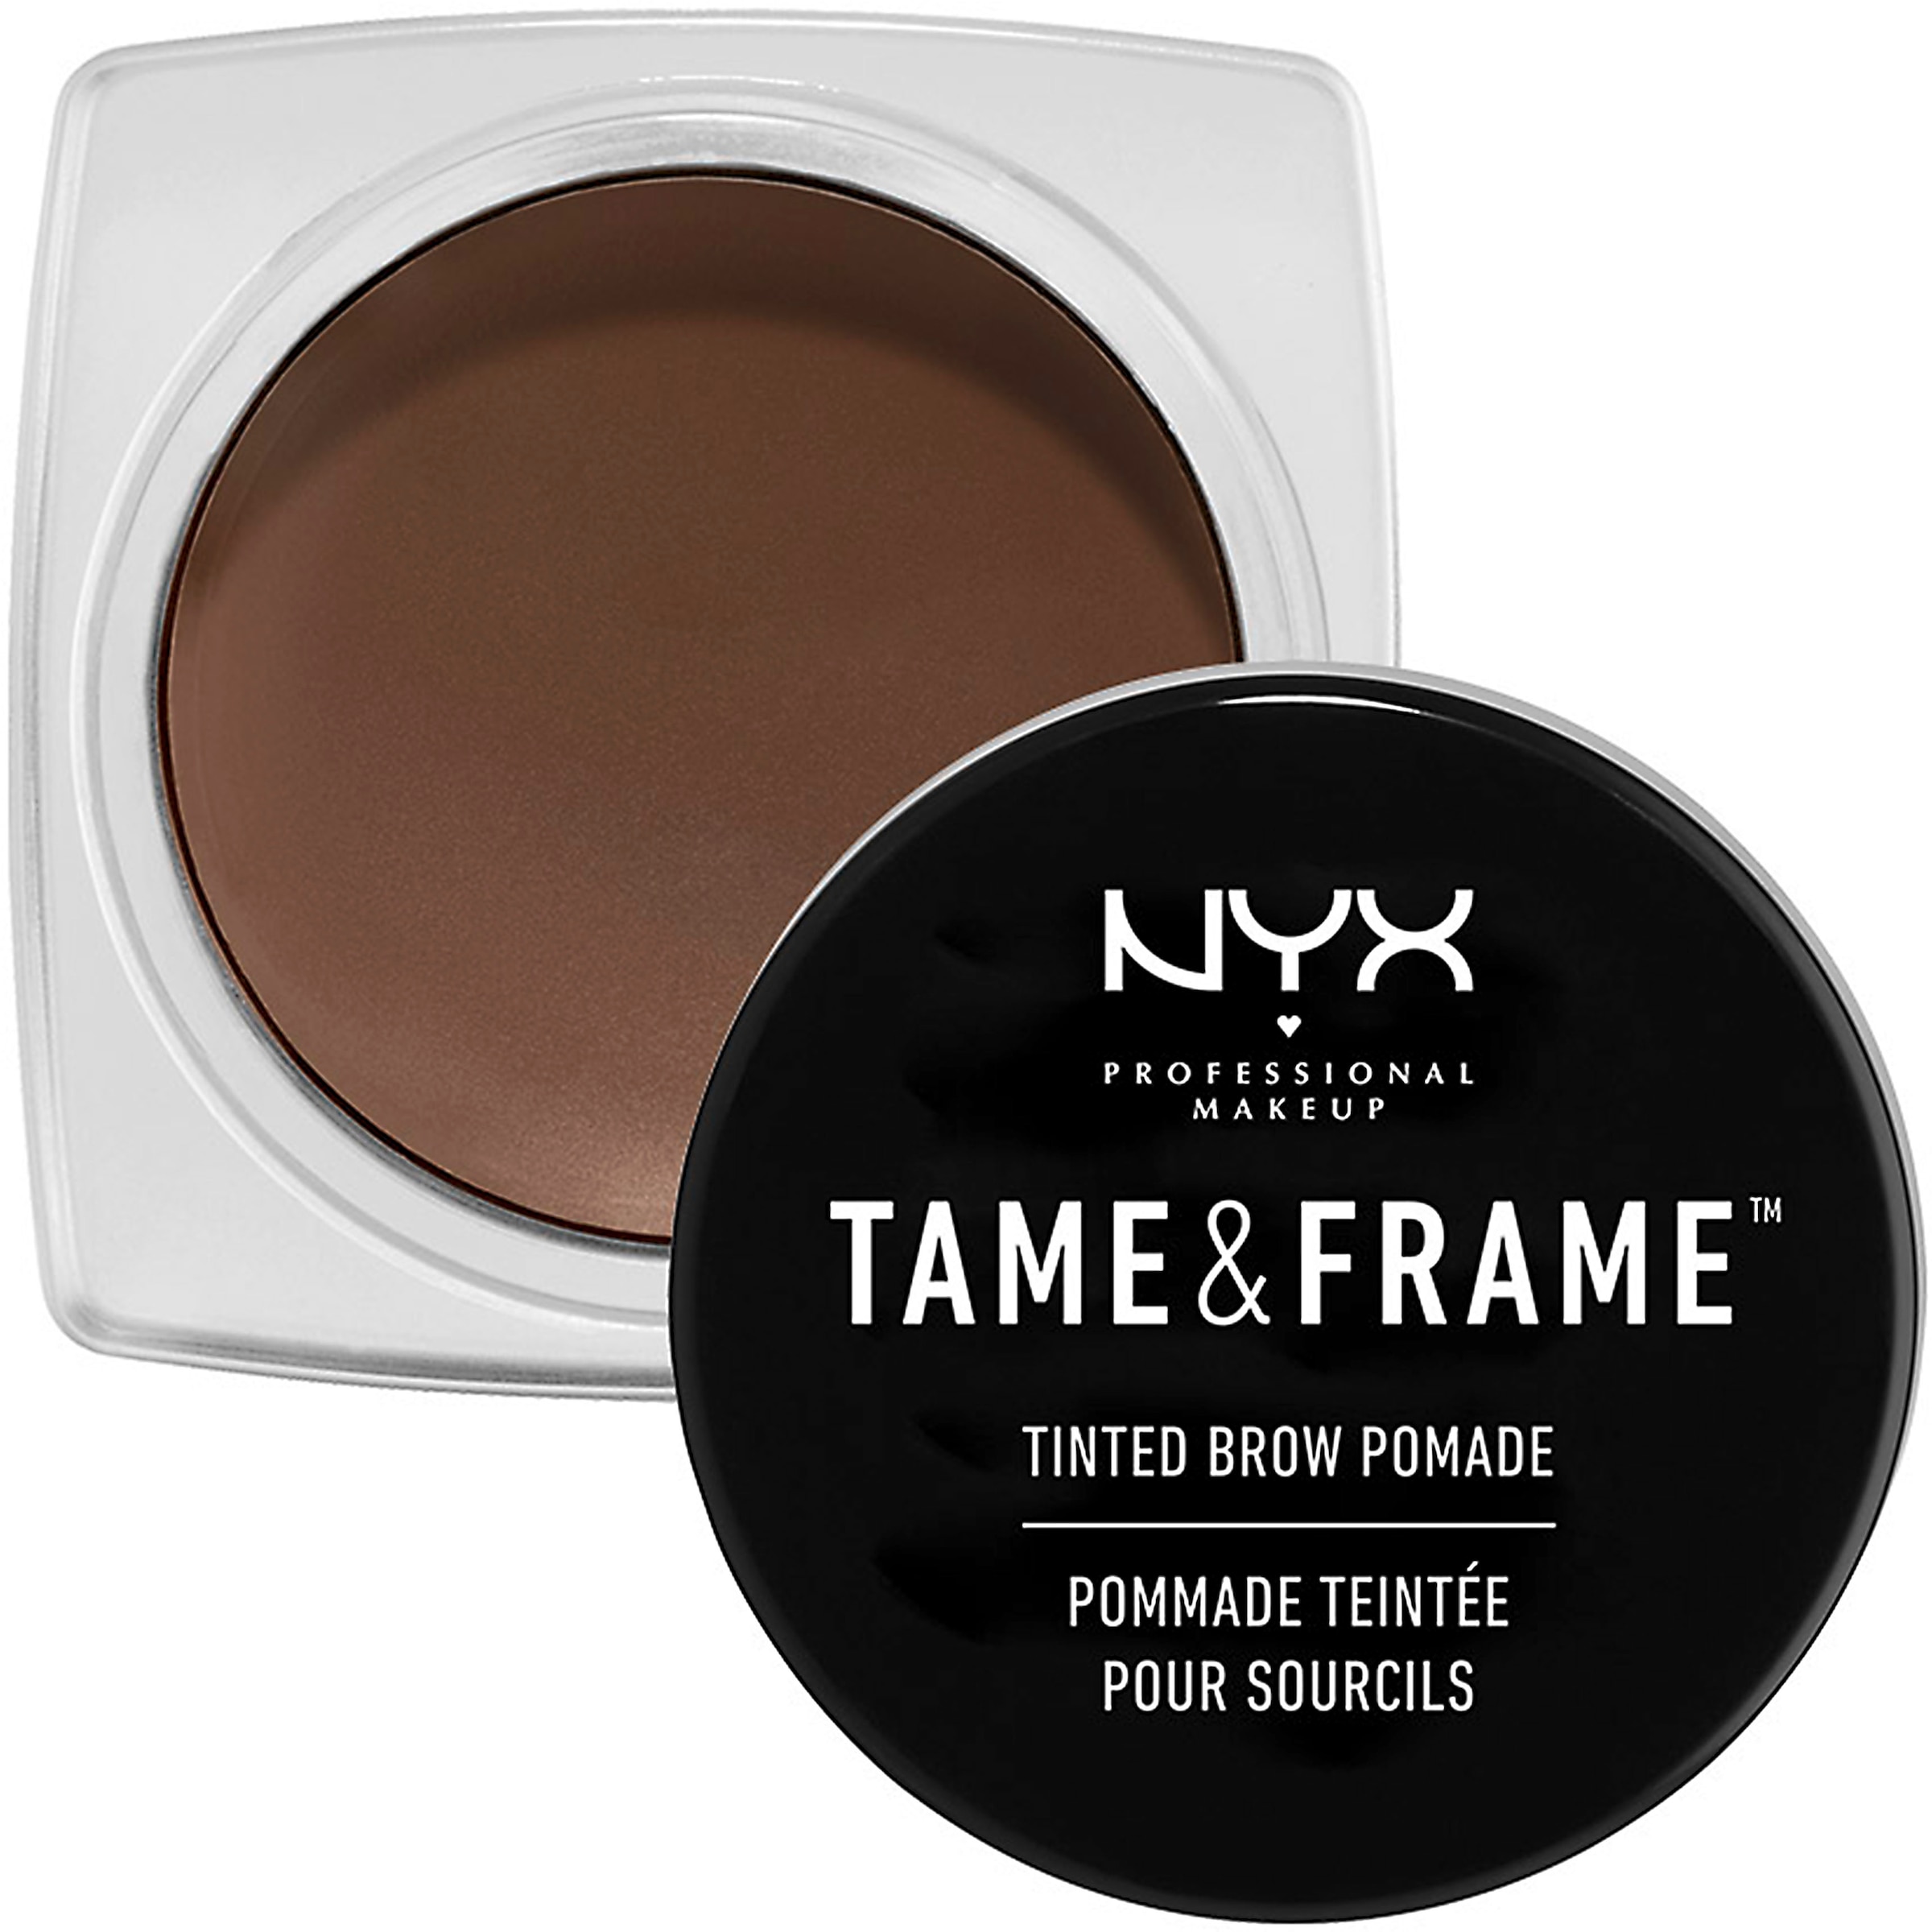 NYX Augenbrauen-Gel »Professional Makeup | and Frame kaufen Tame Pomade« Brow UNIVERSAL